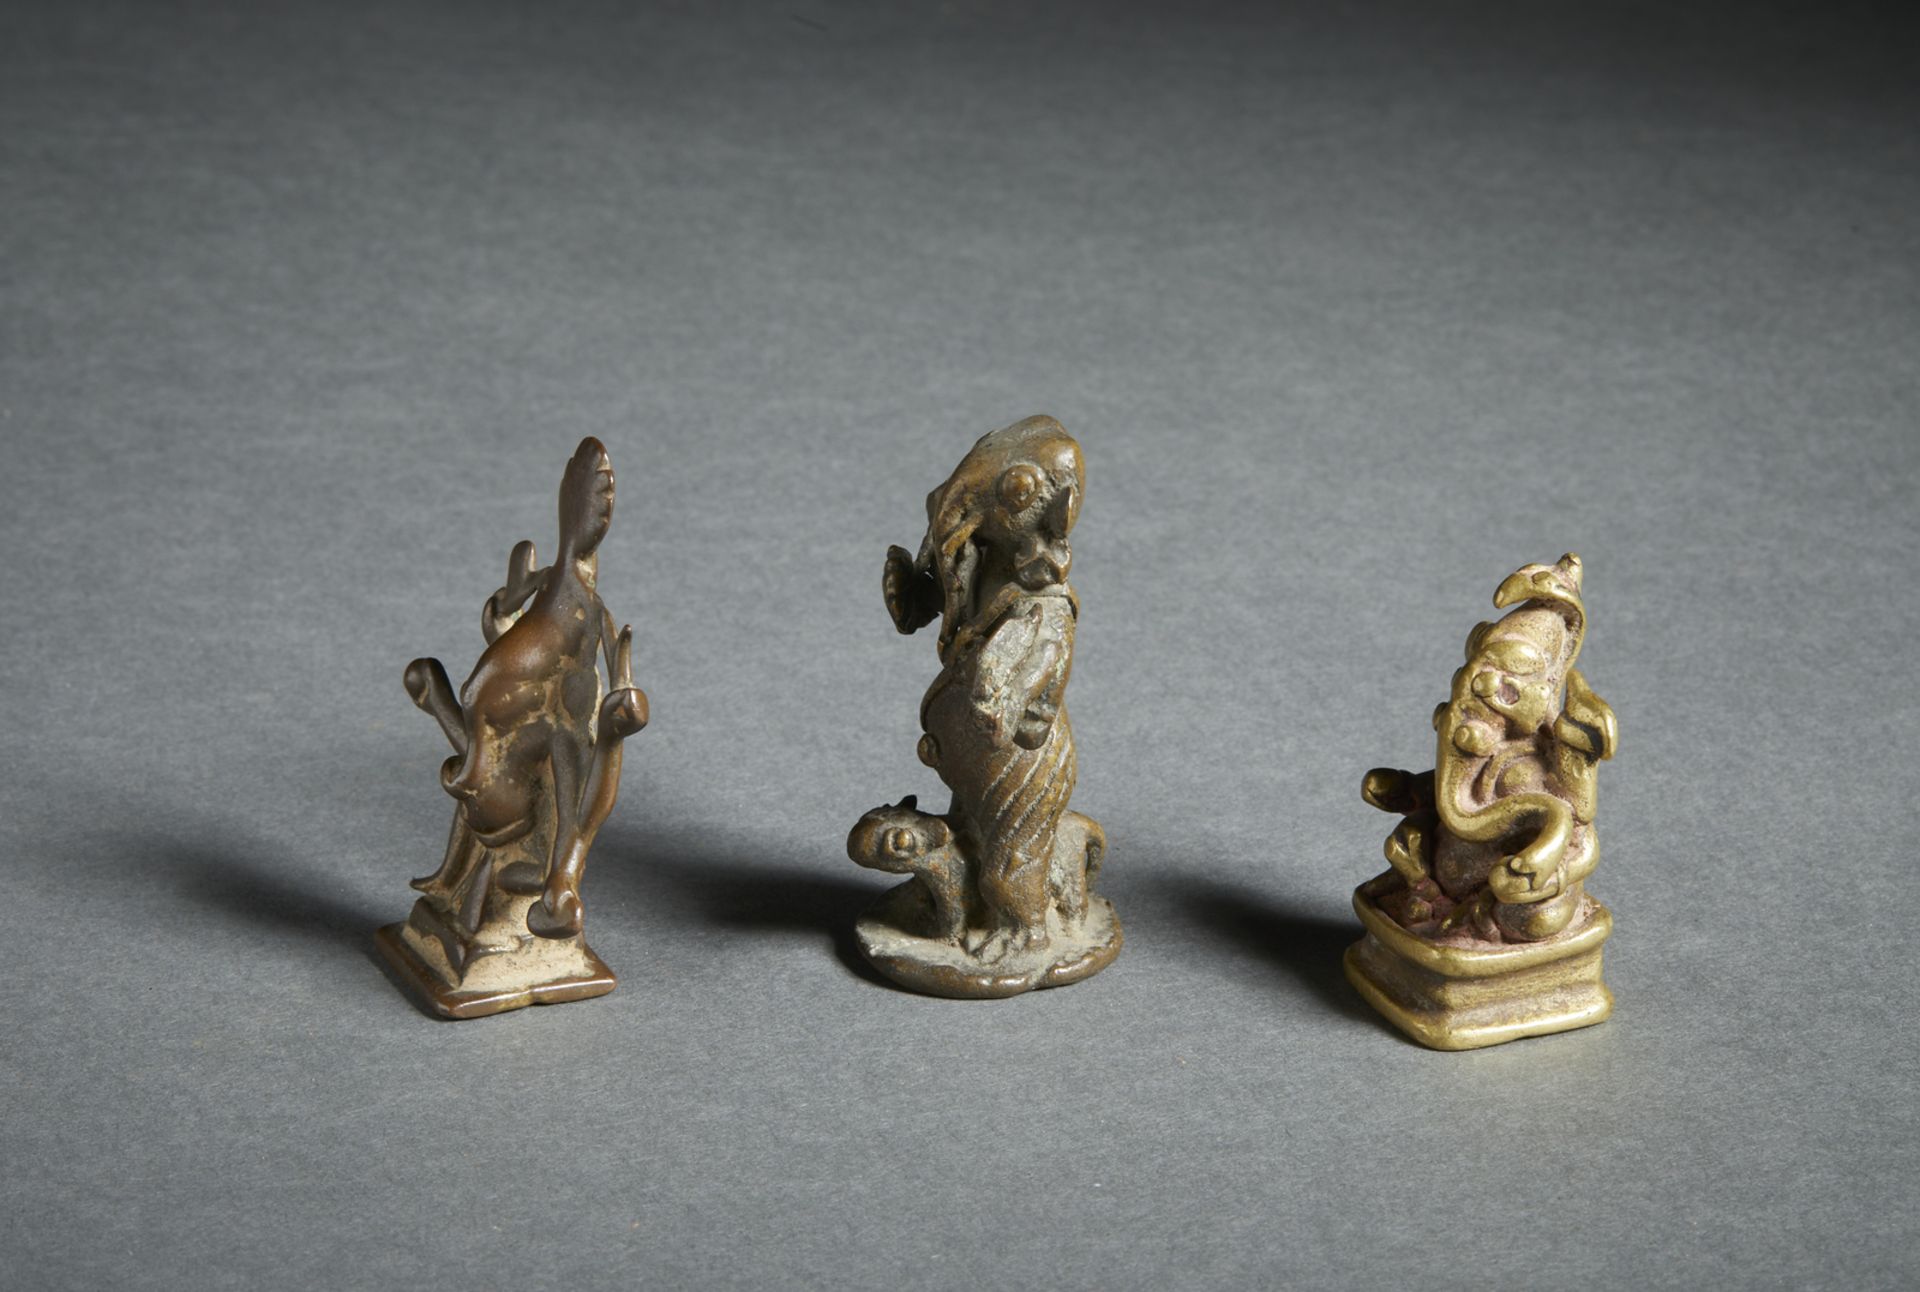 A group of three copper alloy figures of Ganesh Southern India, 18th and late 19th century Cm 5,00 x - Image 2 of 2